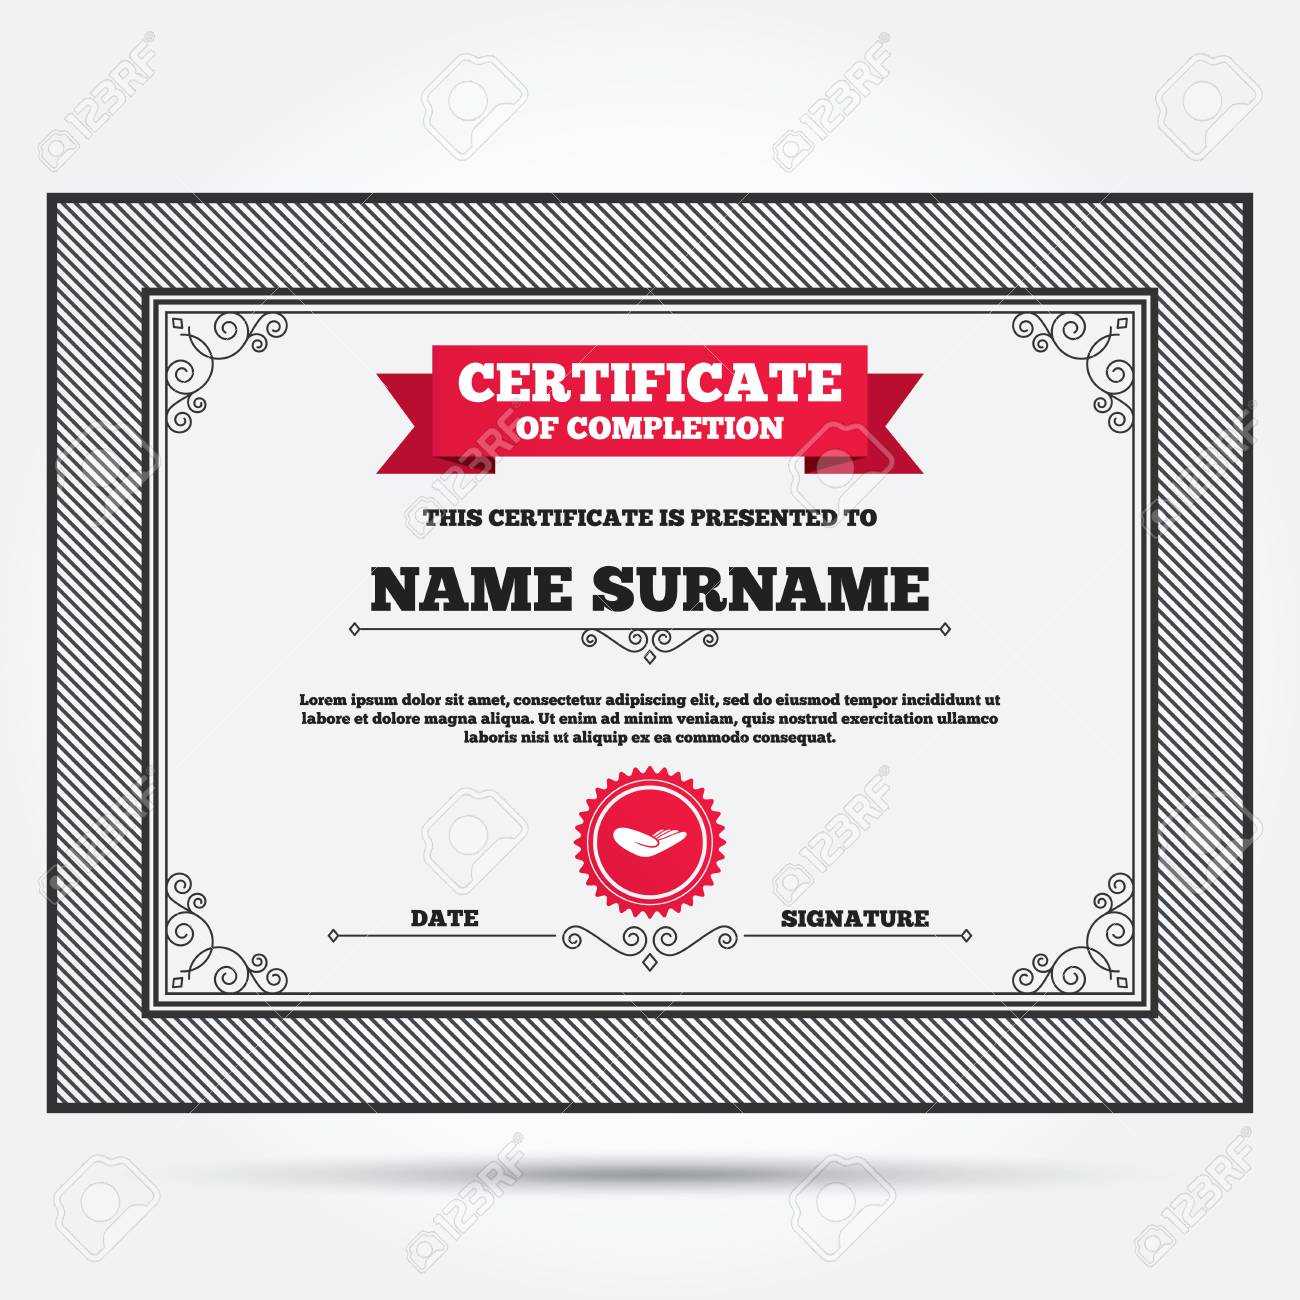 Certificate Of Completion. Donation Hand Sign Icon. Charity Or Endowment  Symbol. Human Helping Hand Palm. Template With Vintage Patterns. Vector Pertaining To Donation Certificate Template